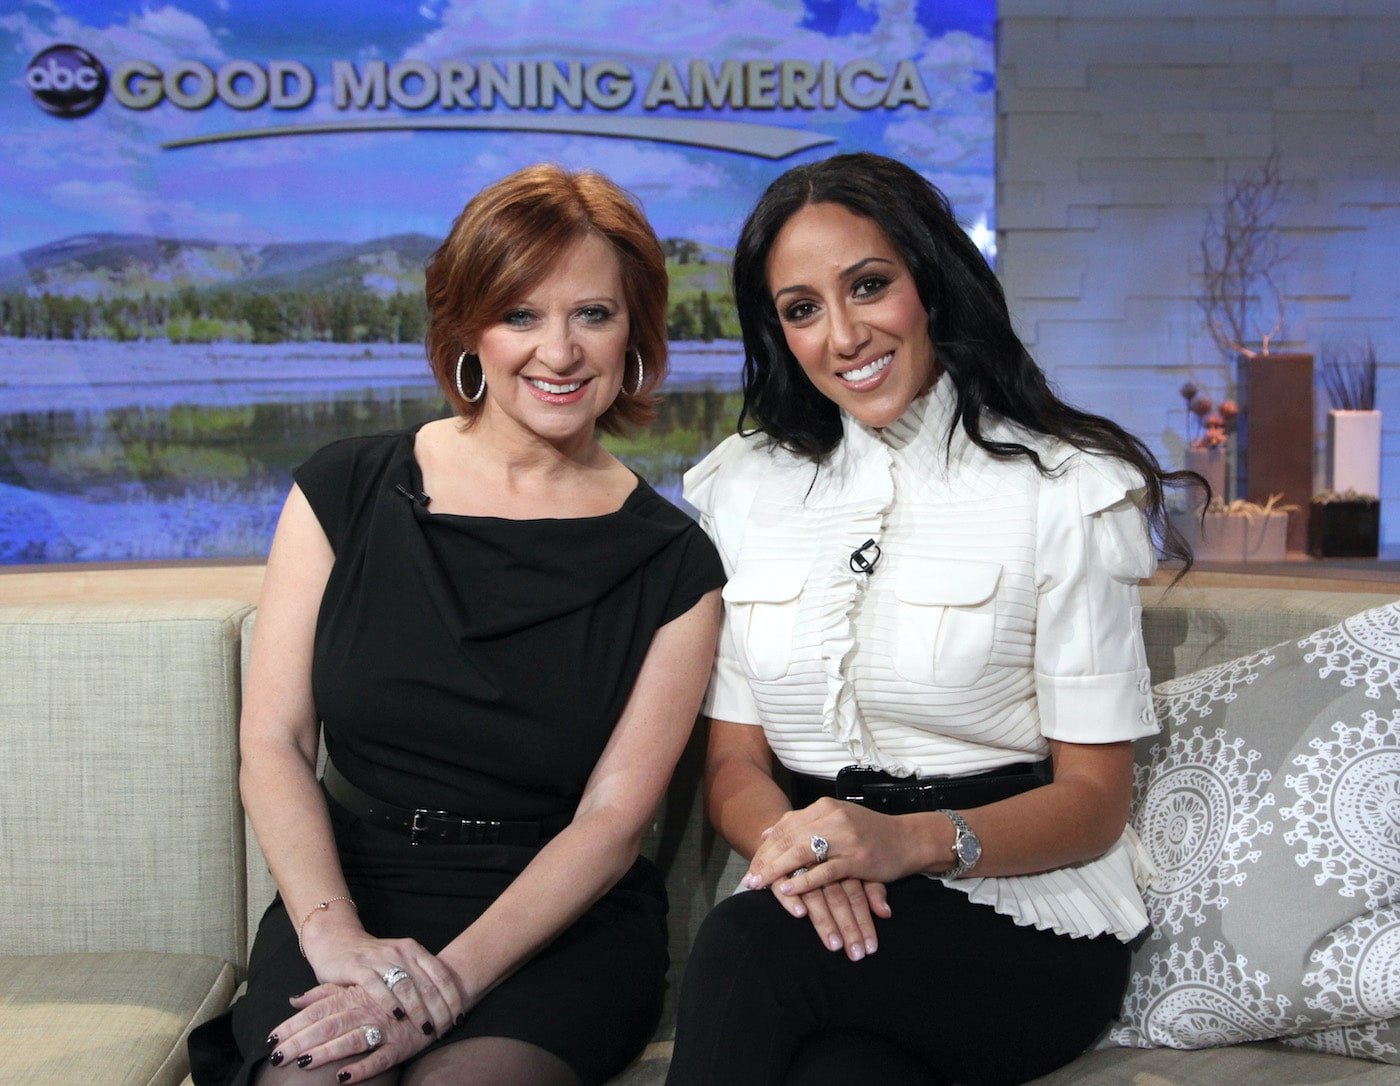 Caroline Manzo and Melissa Gorga from 'RHONJ' appeared on a talk show in 2011